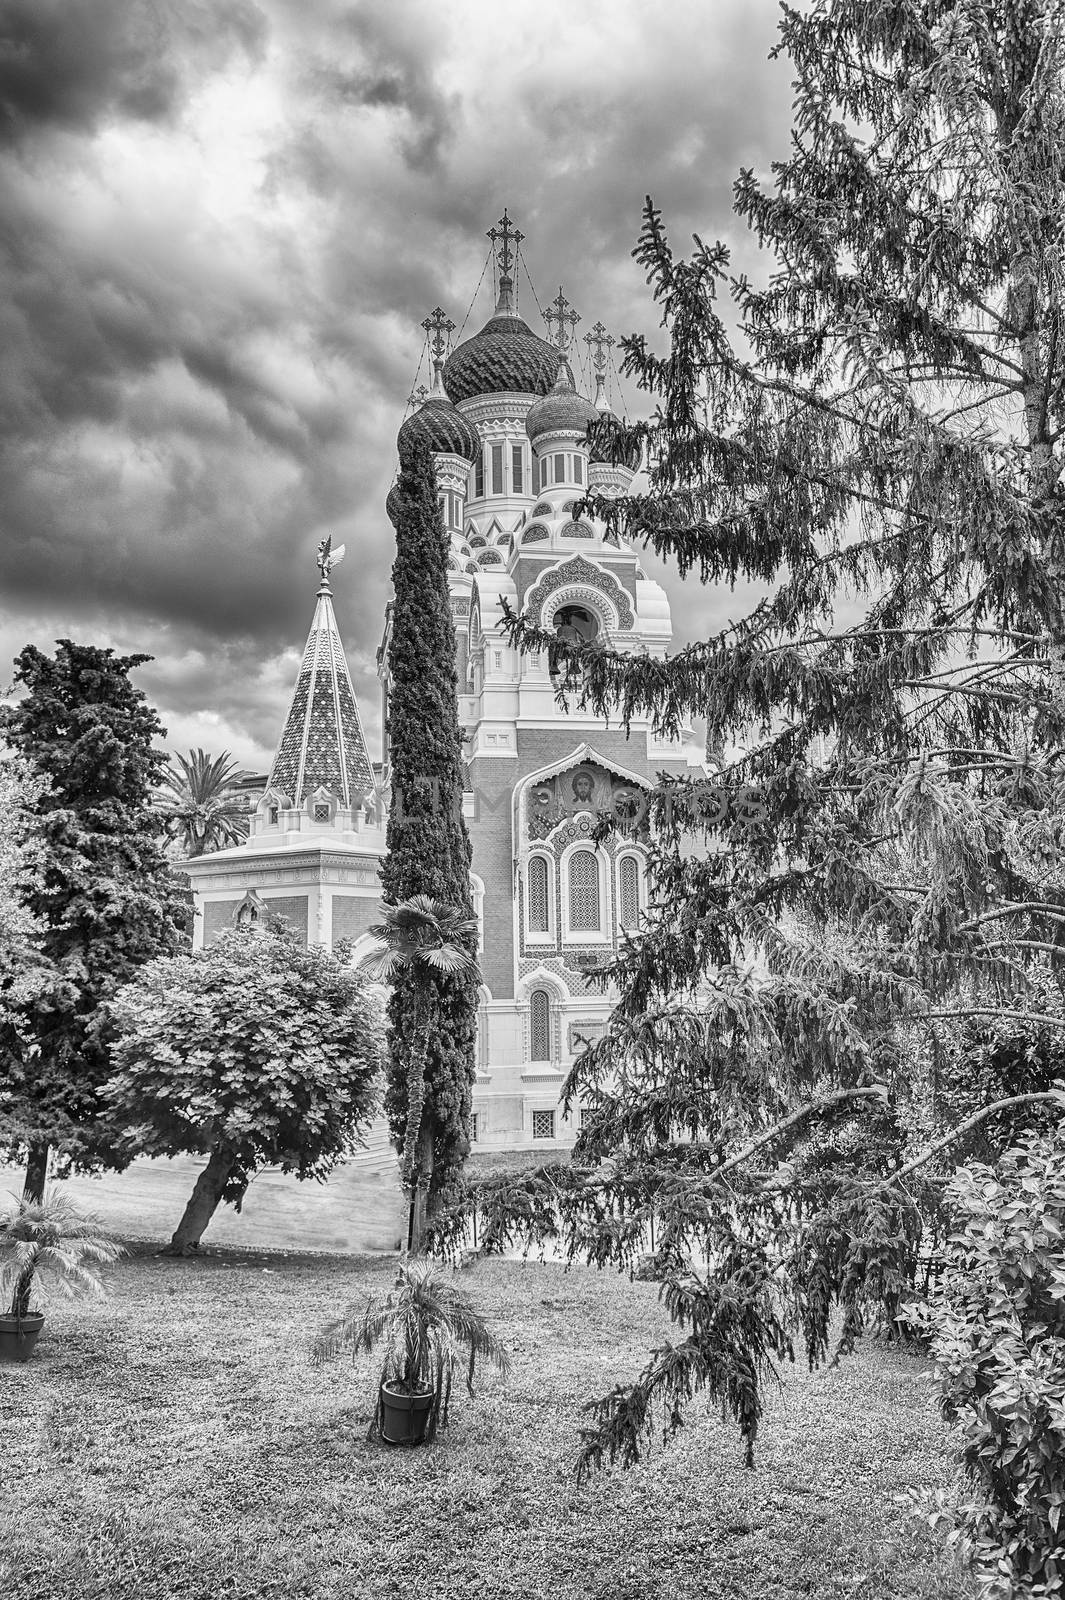 The iconic St Nicholas Orthodox Cathedral, Nice, Cote d'Azur, Fr by marcorubino